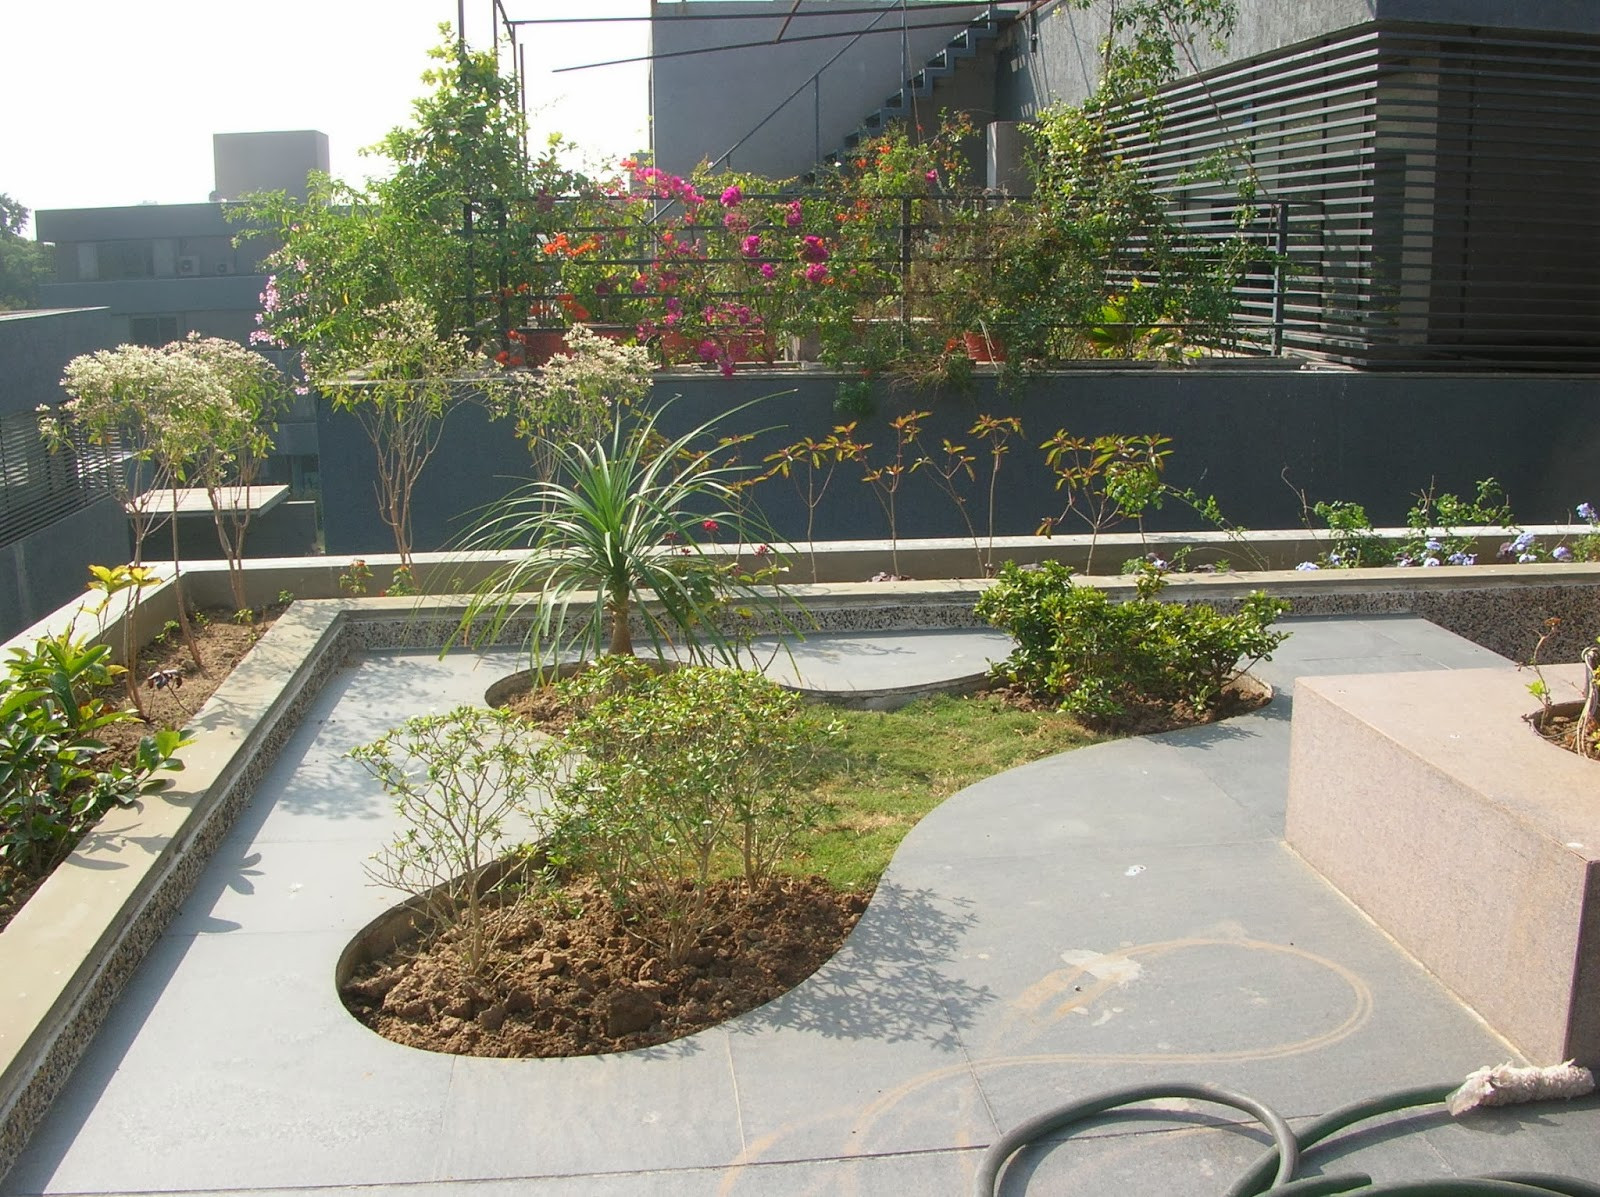 Terrace Landscape Plants
 Bonsai Trees and Plants in Ahmedabad for Sale garden